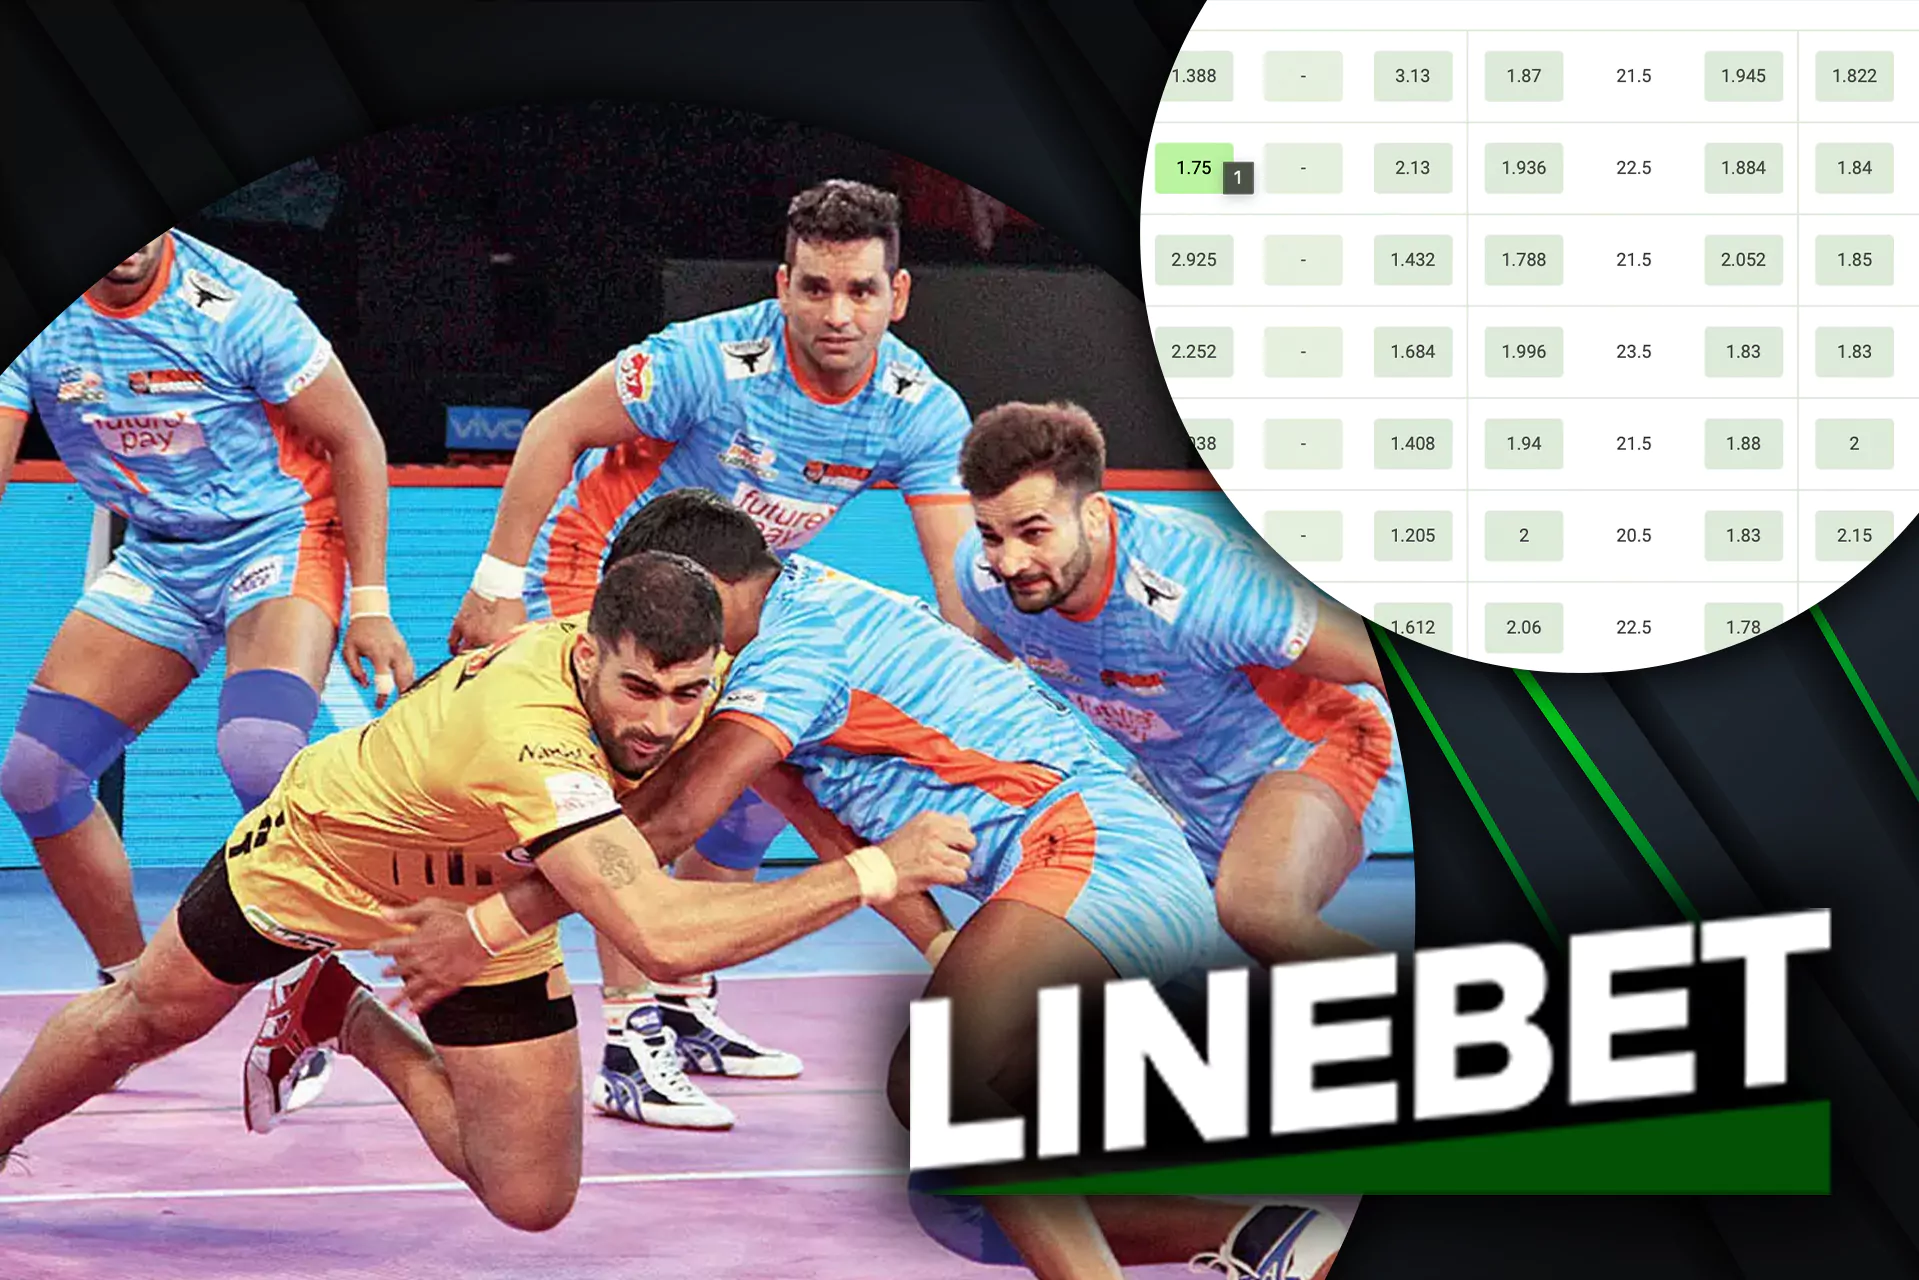 Place bets on the traditional Indian game at Linebet.